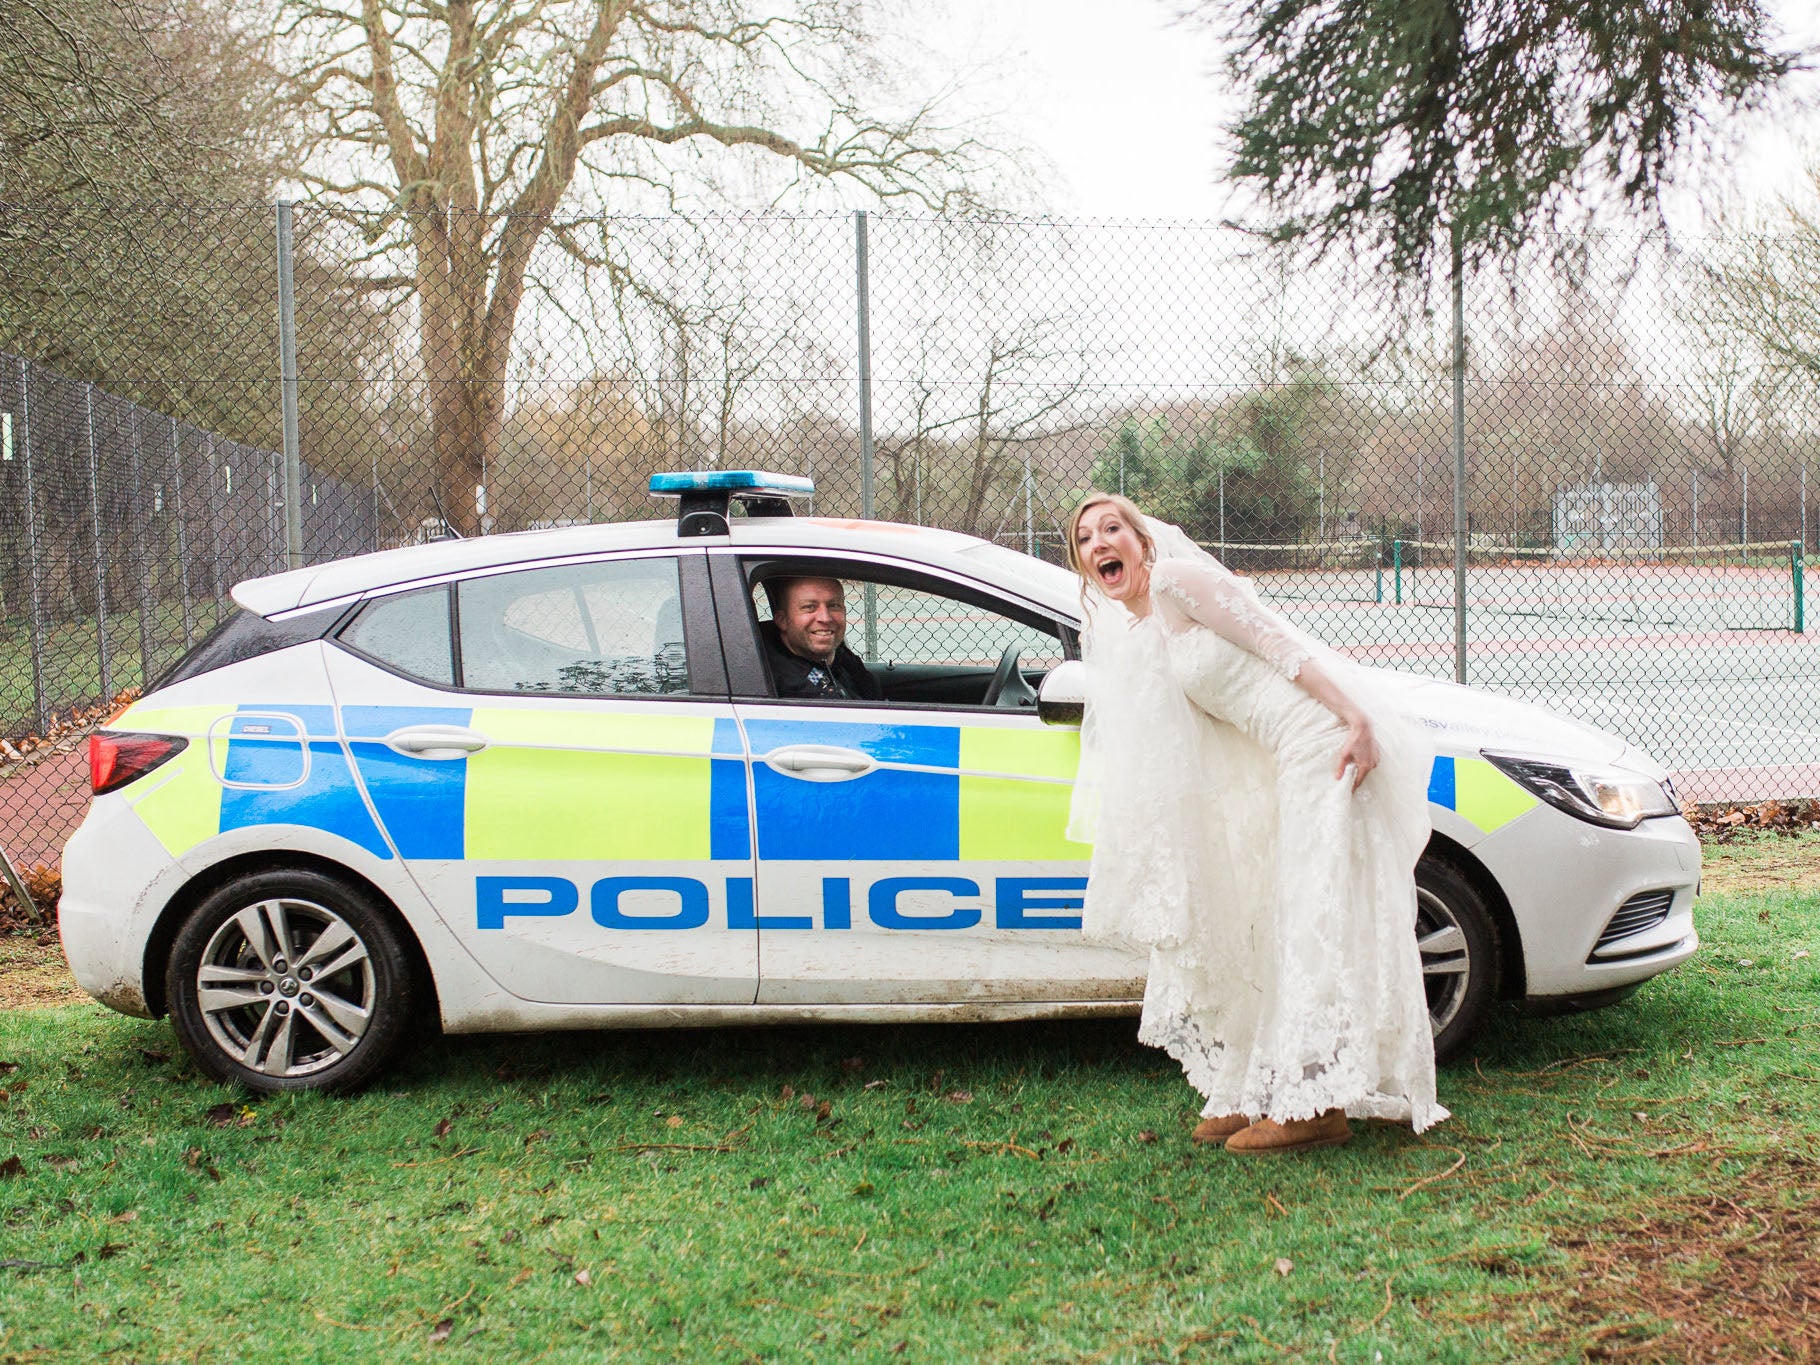 The police congratulated the couple on their big day Annie Crossman/SWNS